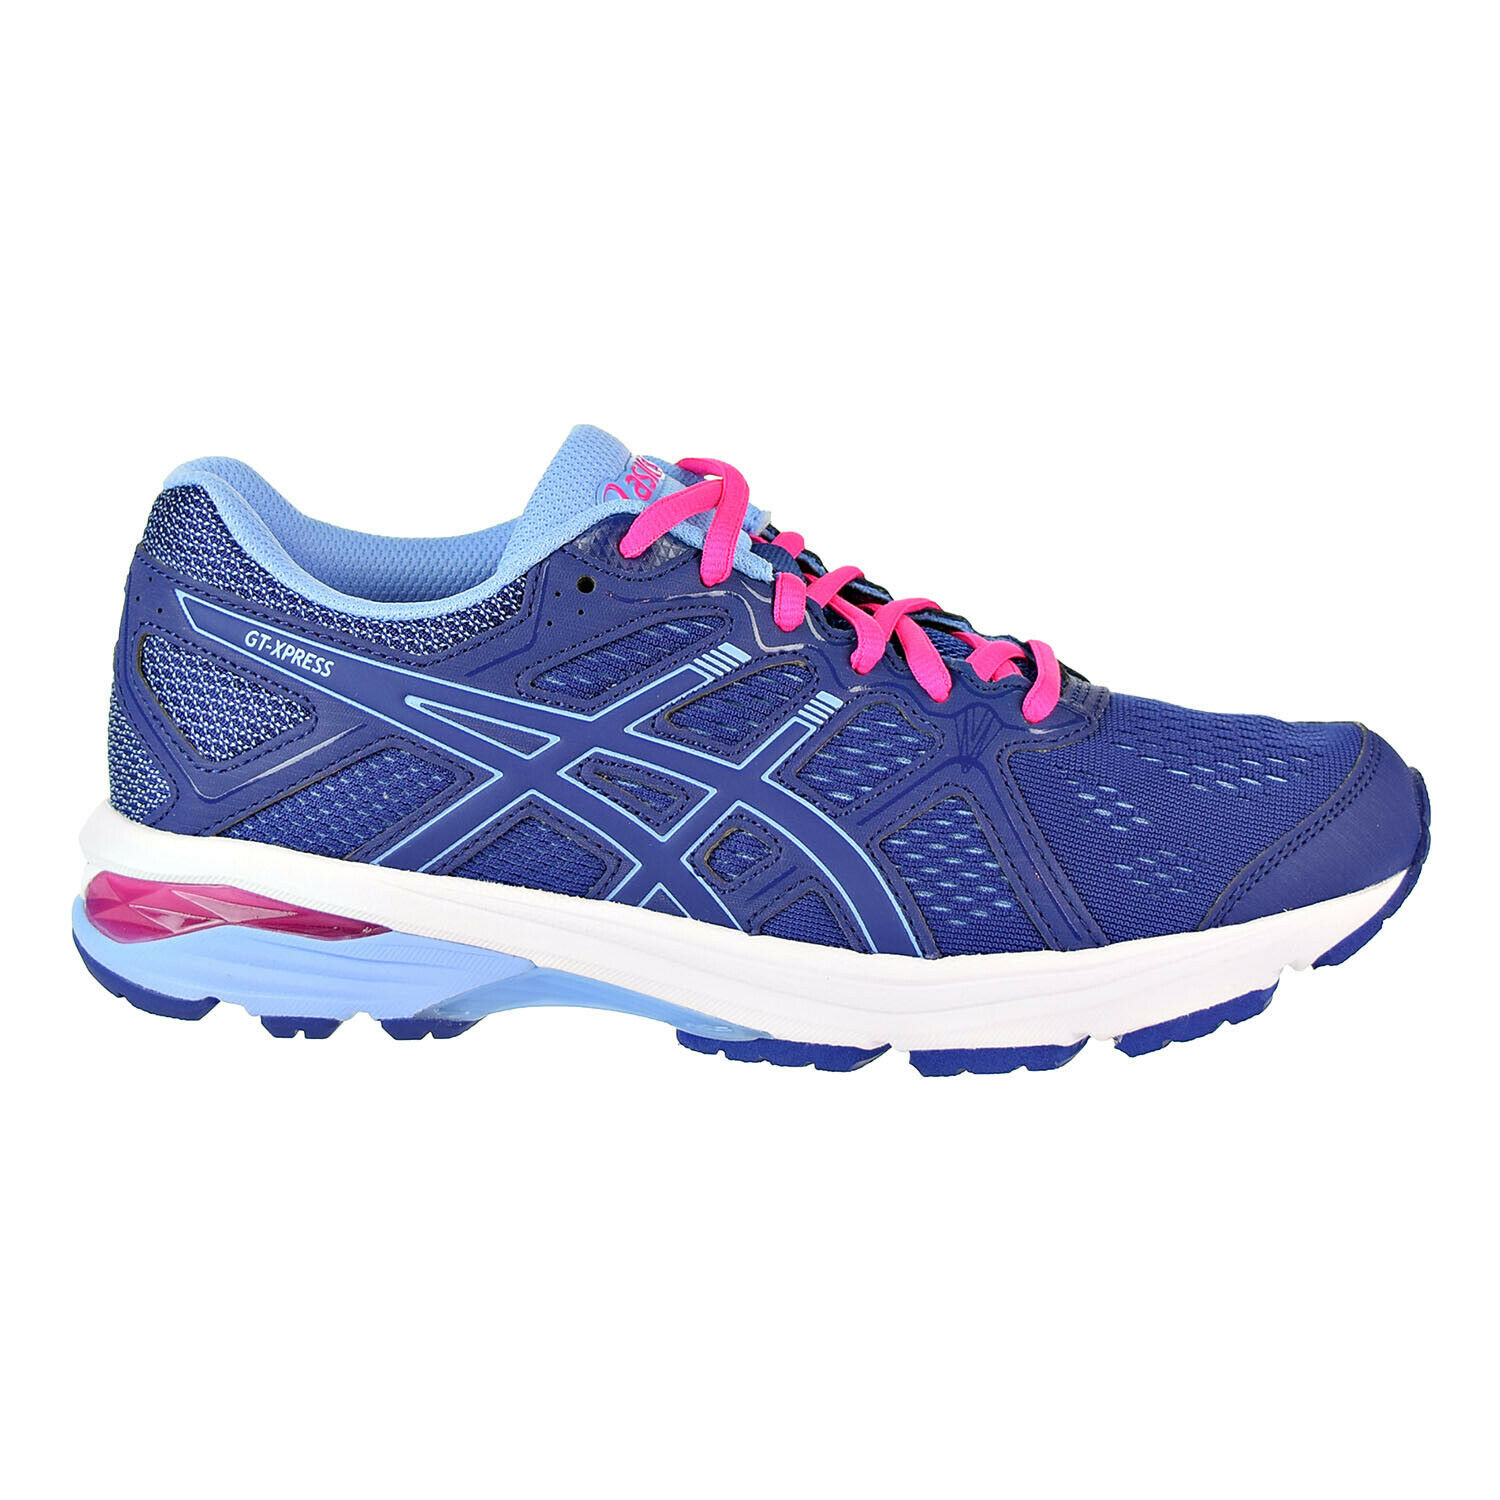 Primary image for Asics GT-Xpress Women's Running Shoes Blue Print-Blue Bell 1012A131-400